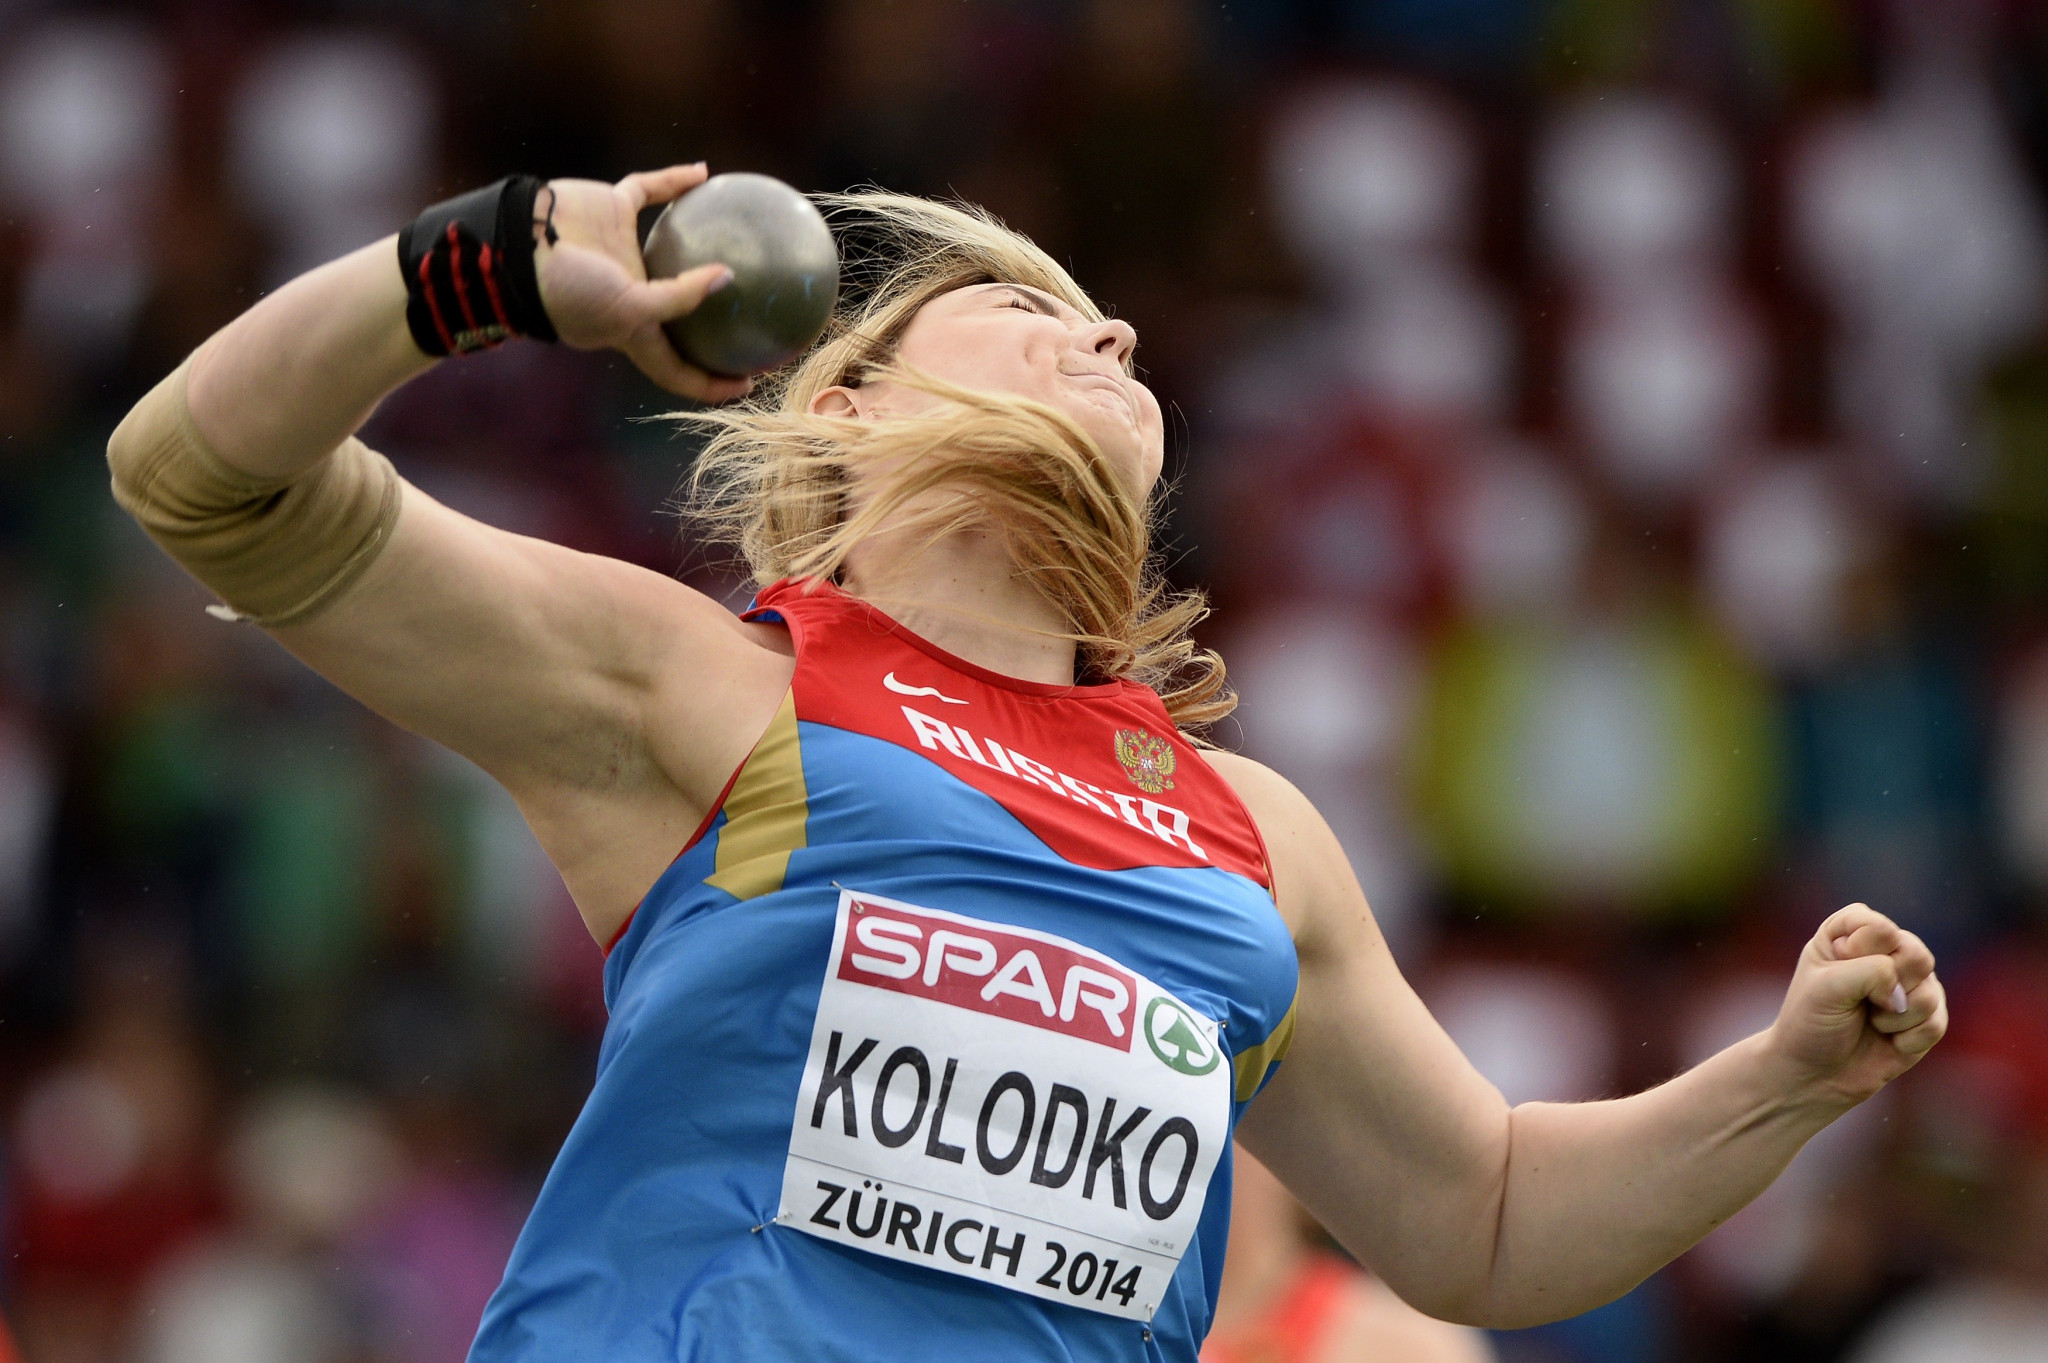 Athletics Integrity Unit ban three more Russians, stripping shot putter of 2014 European Championships silver medal